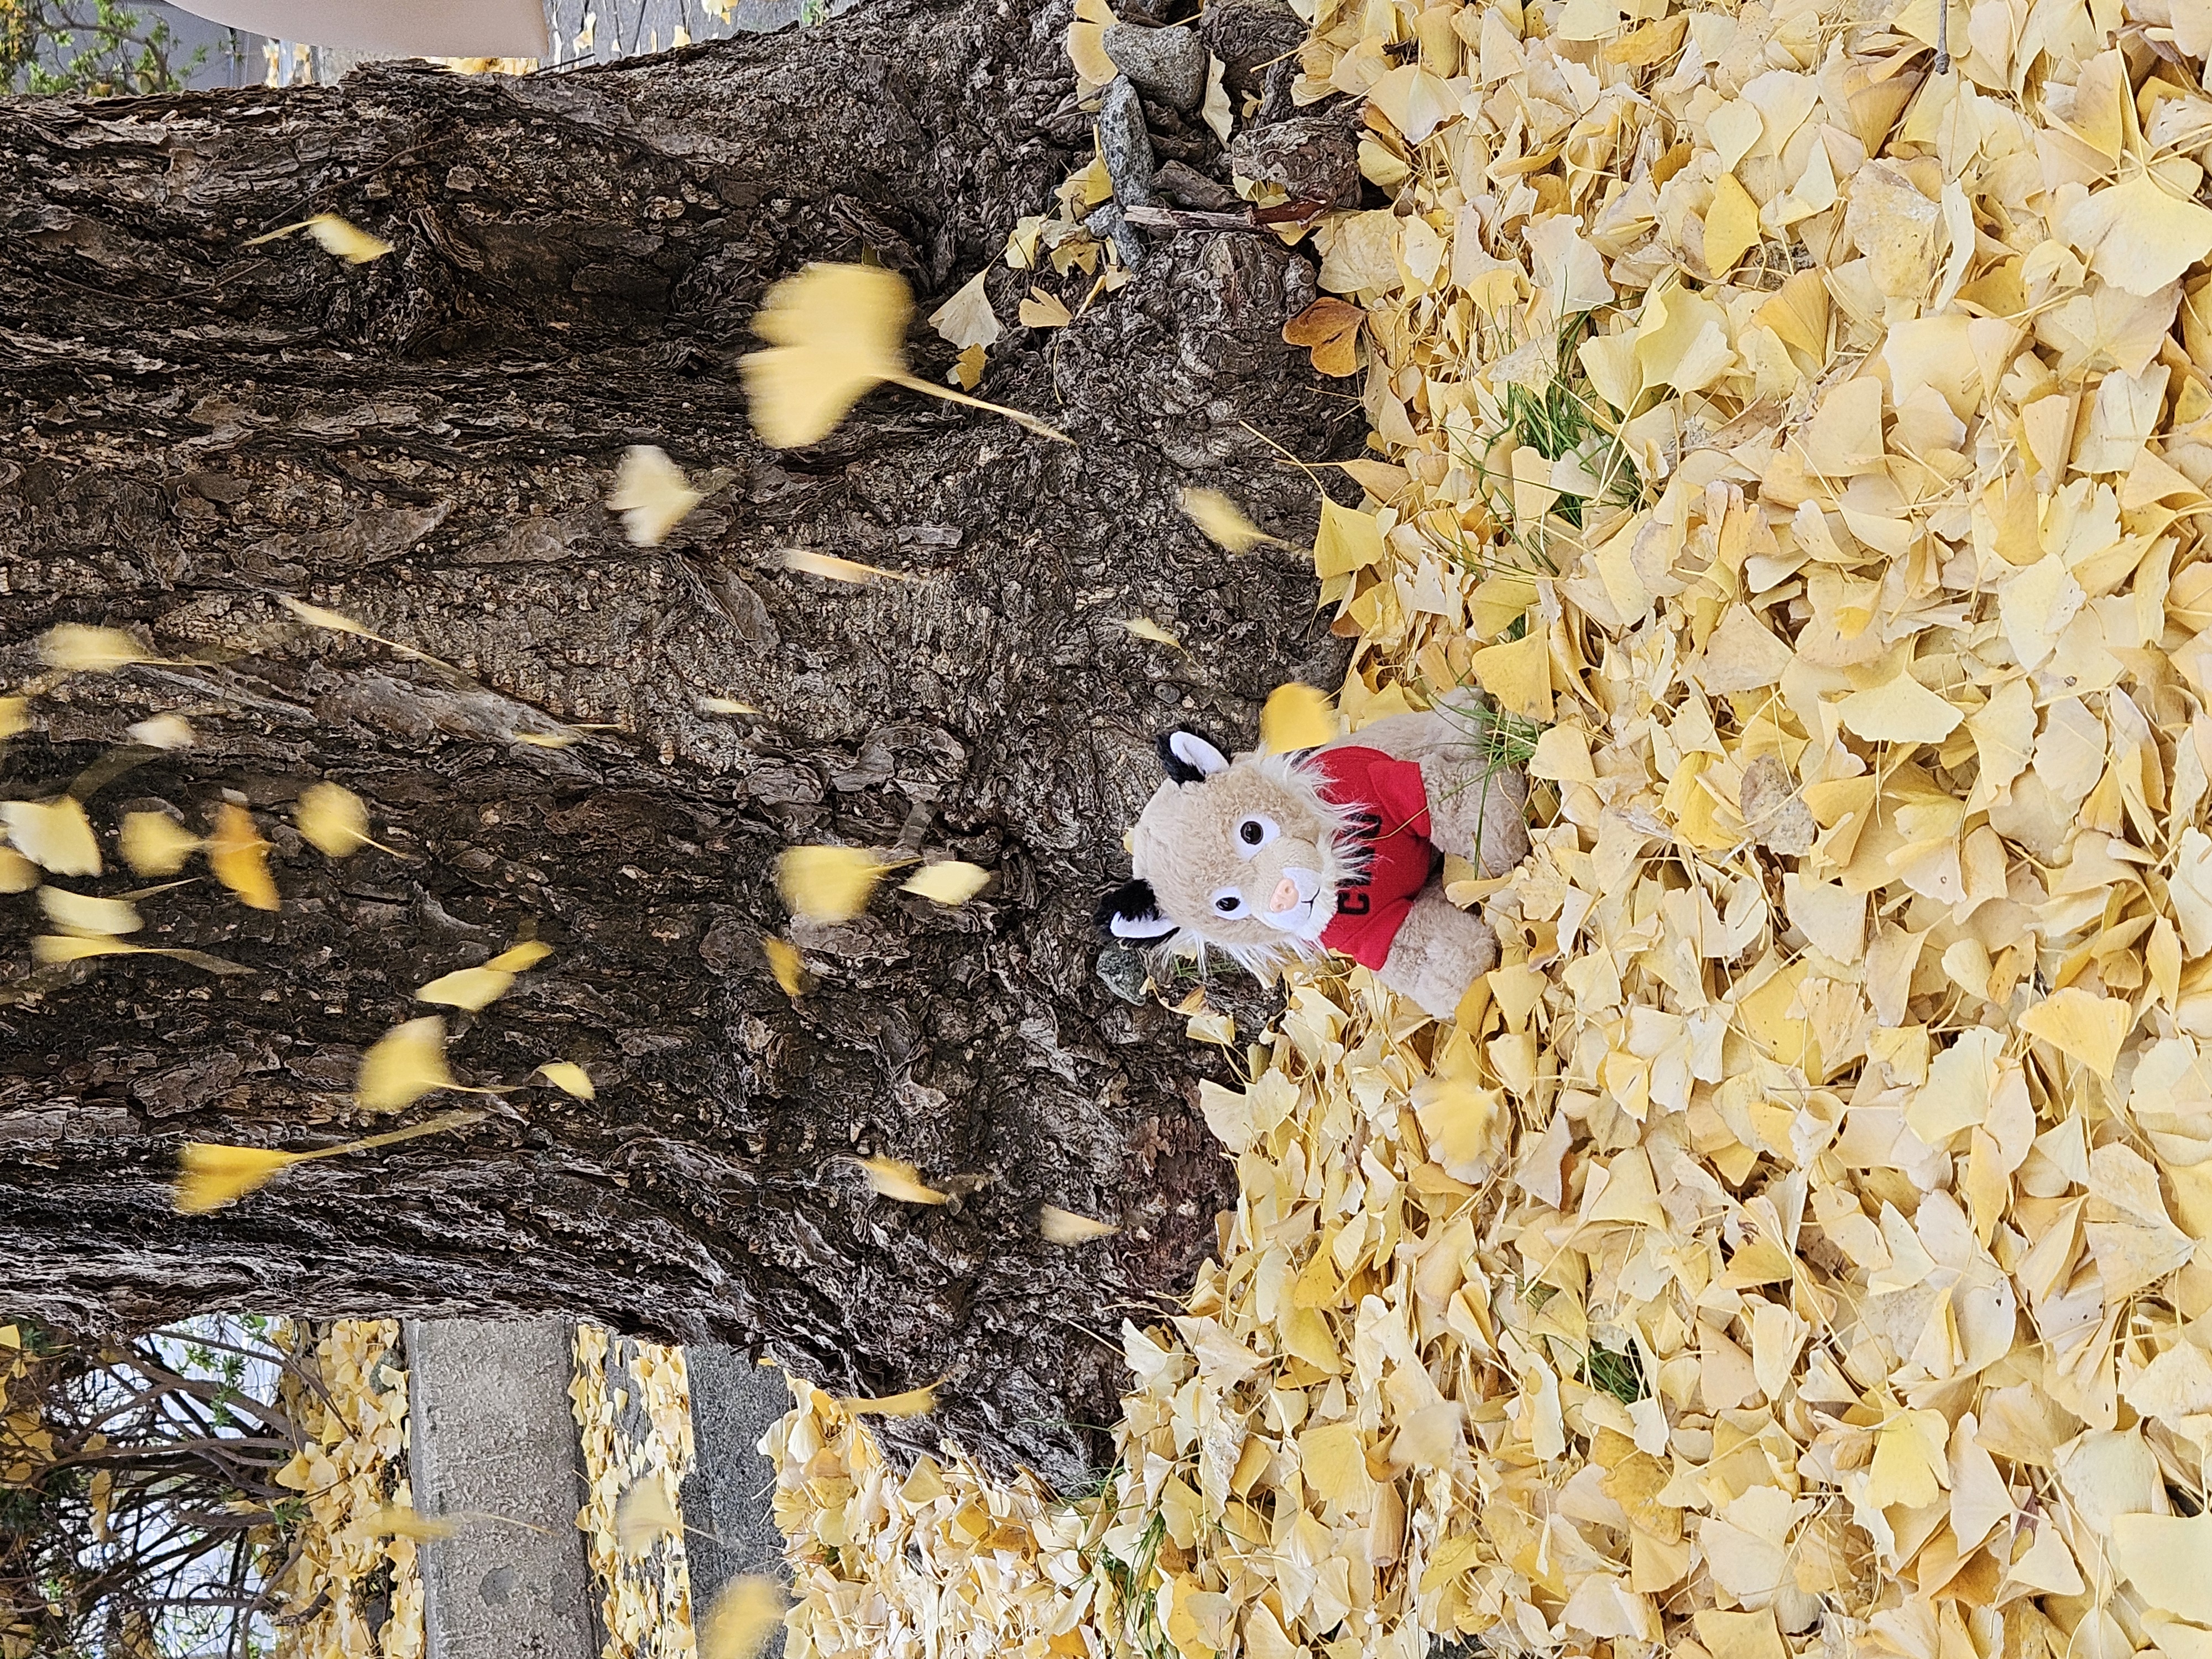 Wellington in Falling Leaves at Hitotsubashi Student Residence